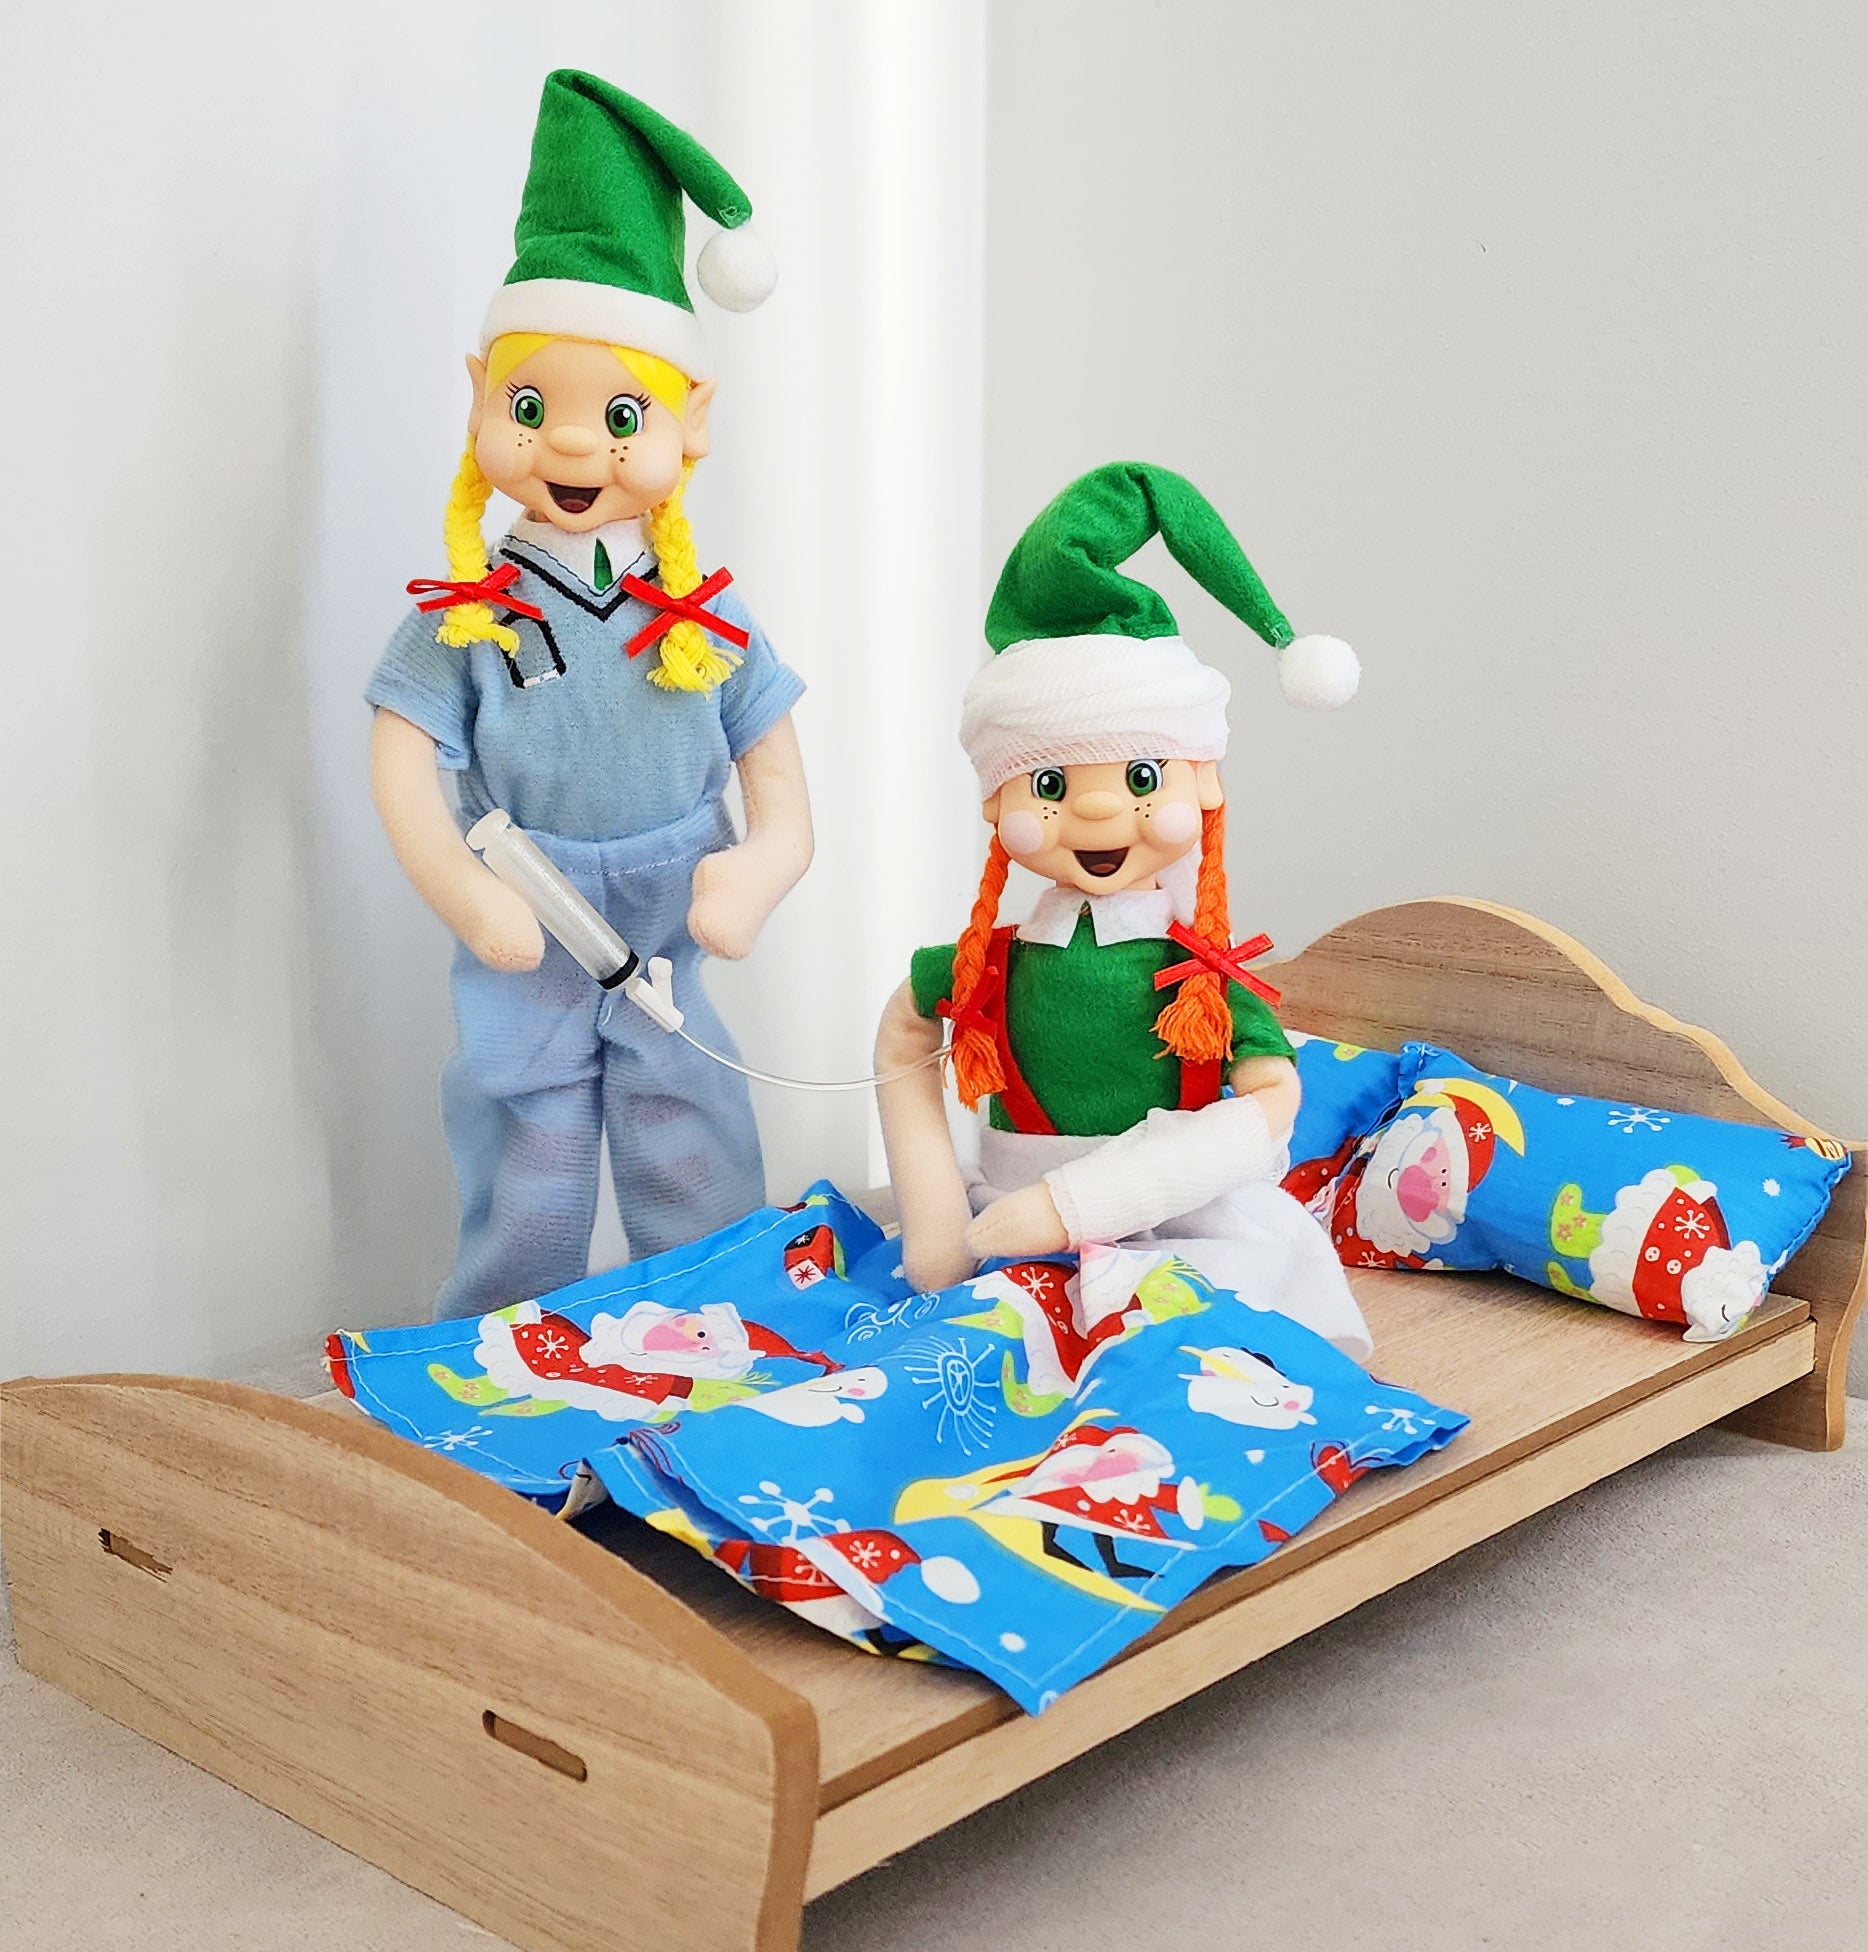 Elf recovering from an injury with feeding tube and bed props